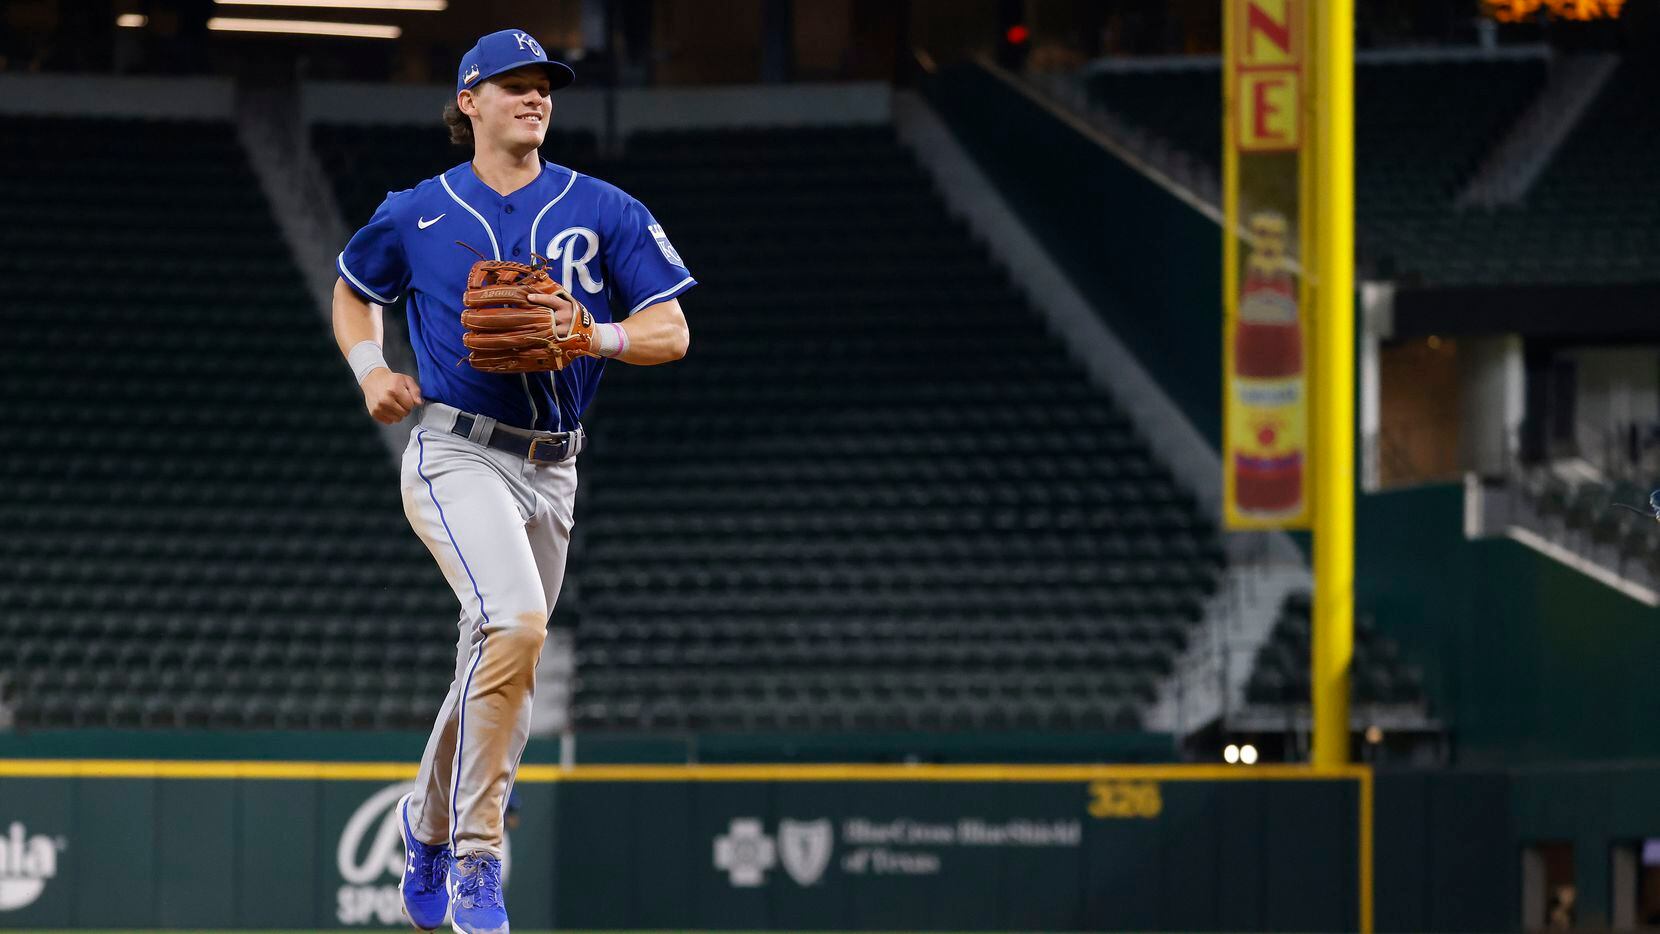 Under The Big Lights: Former Colleyville Heritage star Bobby Witt Jr. gets  the call - VYPE